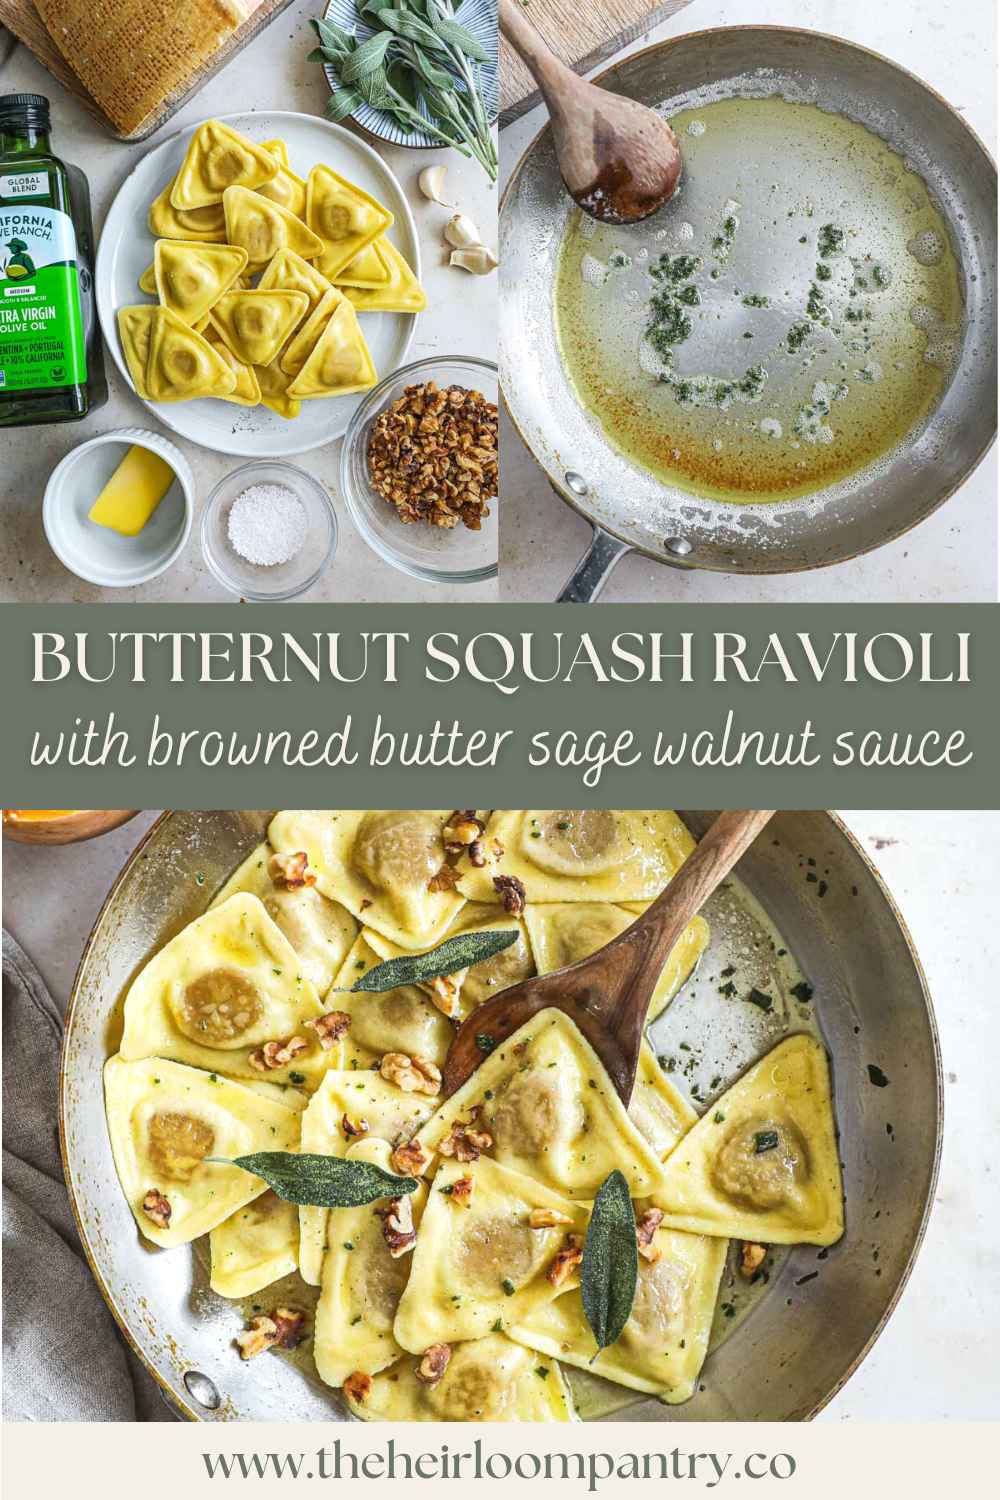 Butternut squash ravioli in a browned butter sage and walnut sauce Pinterest pin.